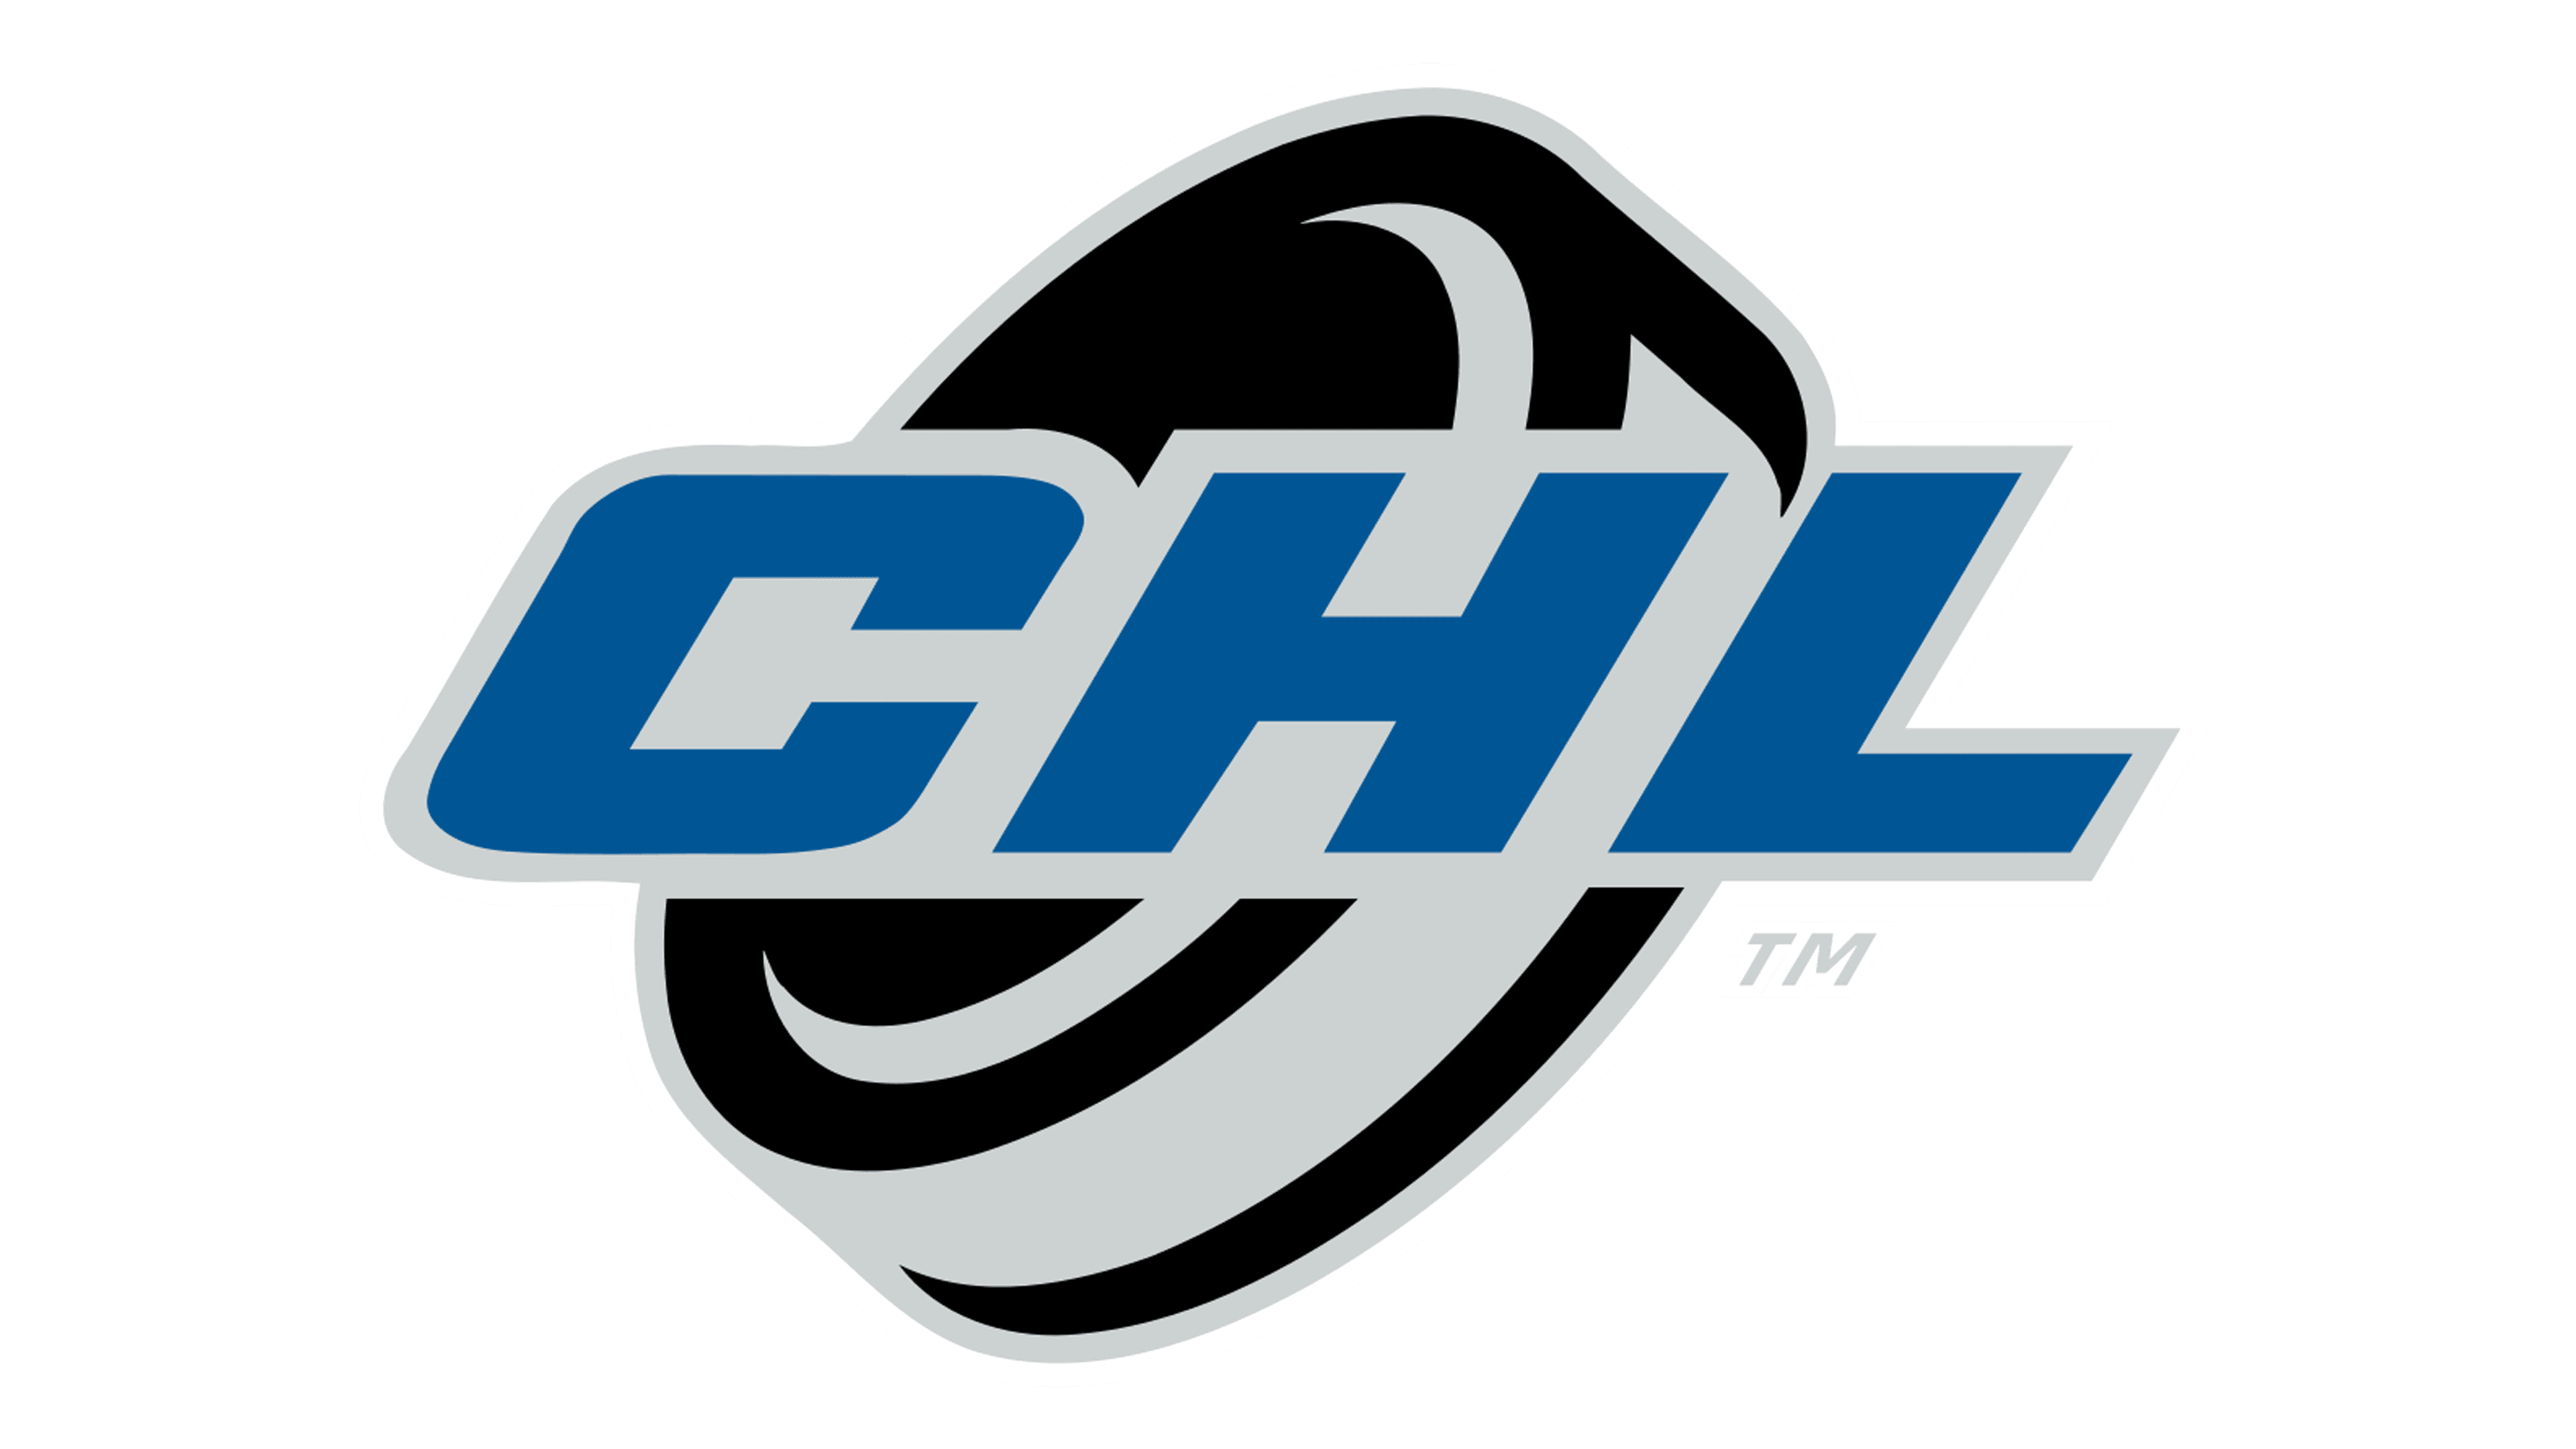 Canadian Hockey League (CHL) logo and symbol, meaning, history, PNG, brand